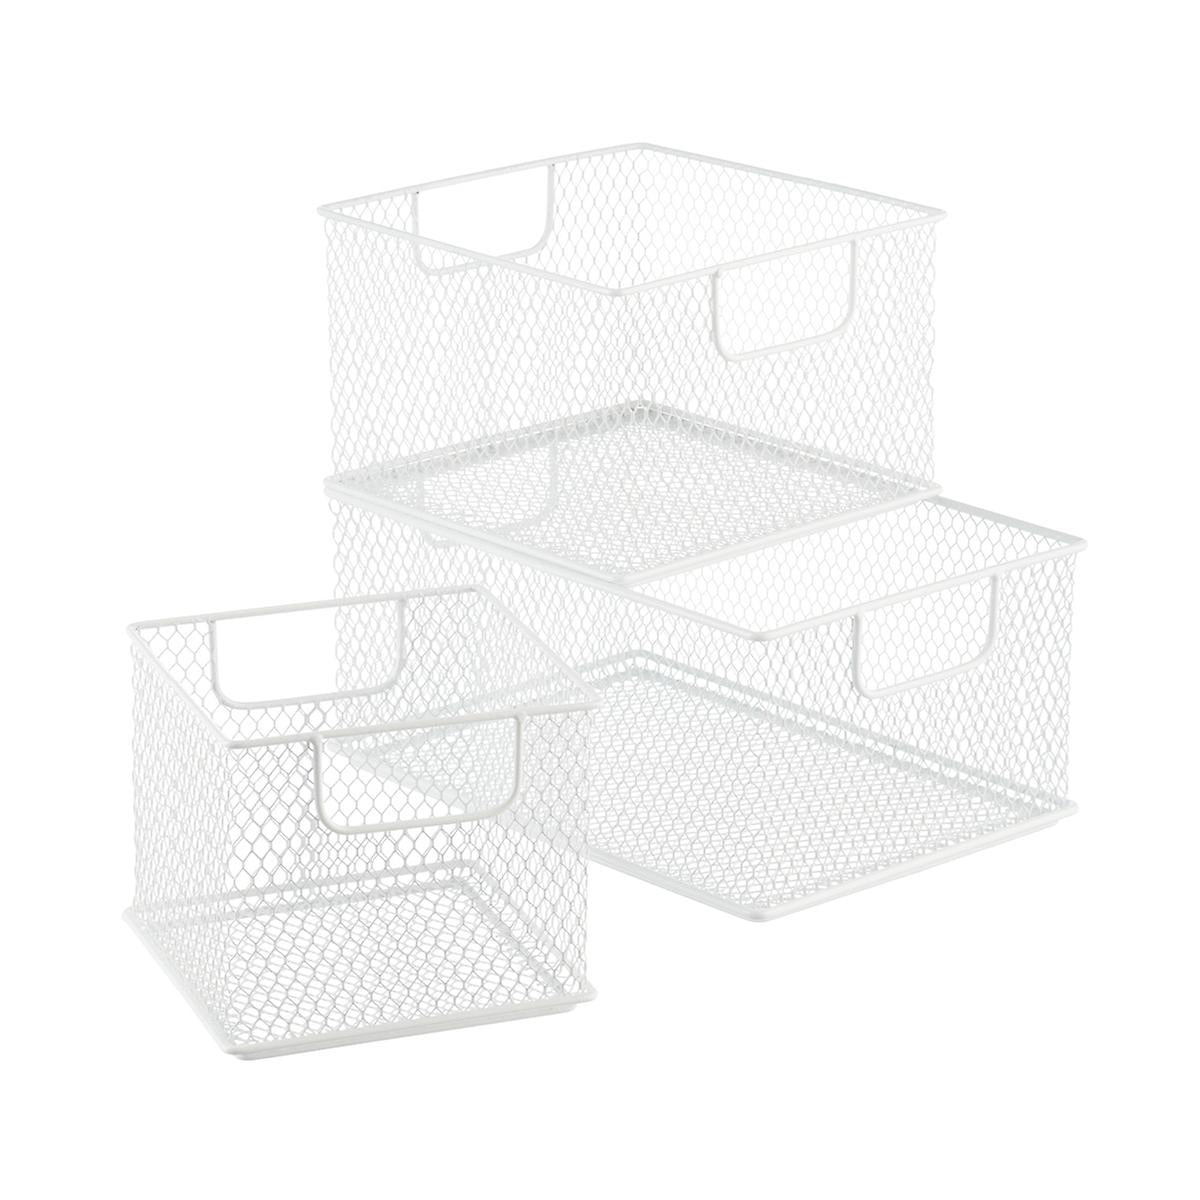 SSWBasics Hat Boxes with Handles - White - 14 x 14 x 7 - Case of 25